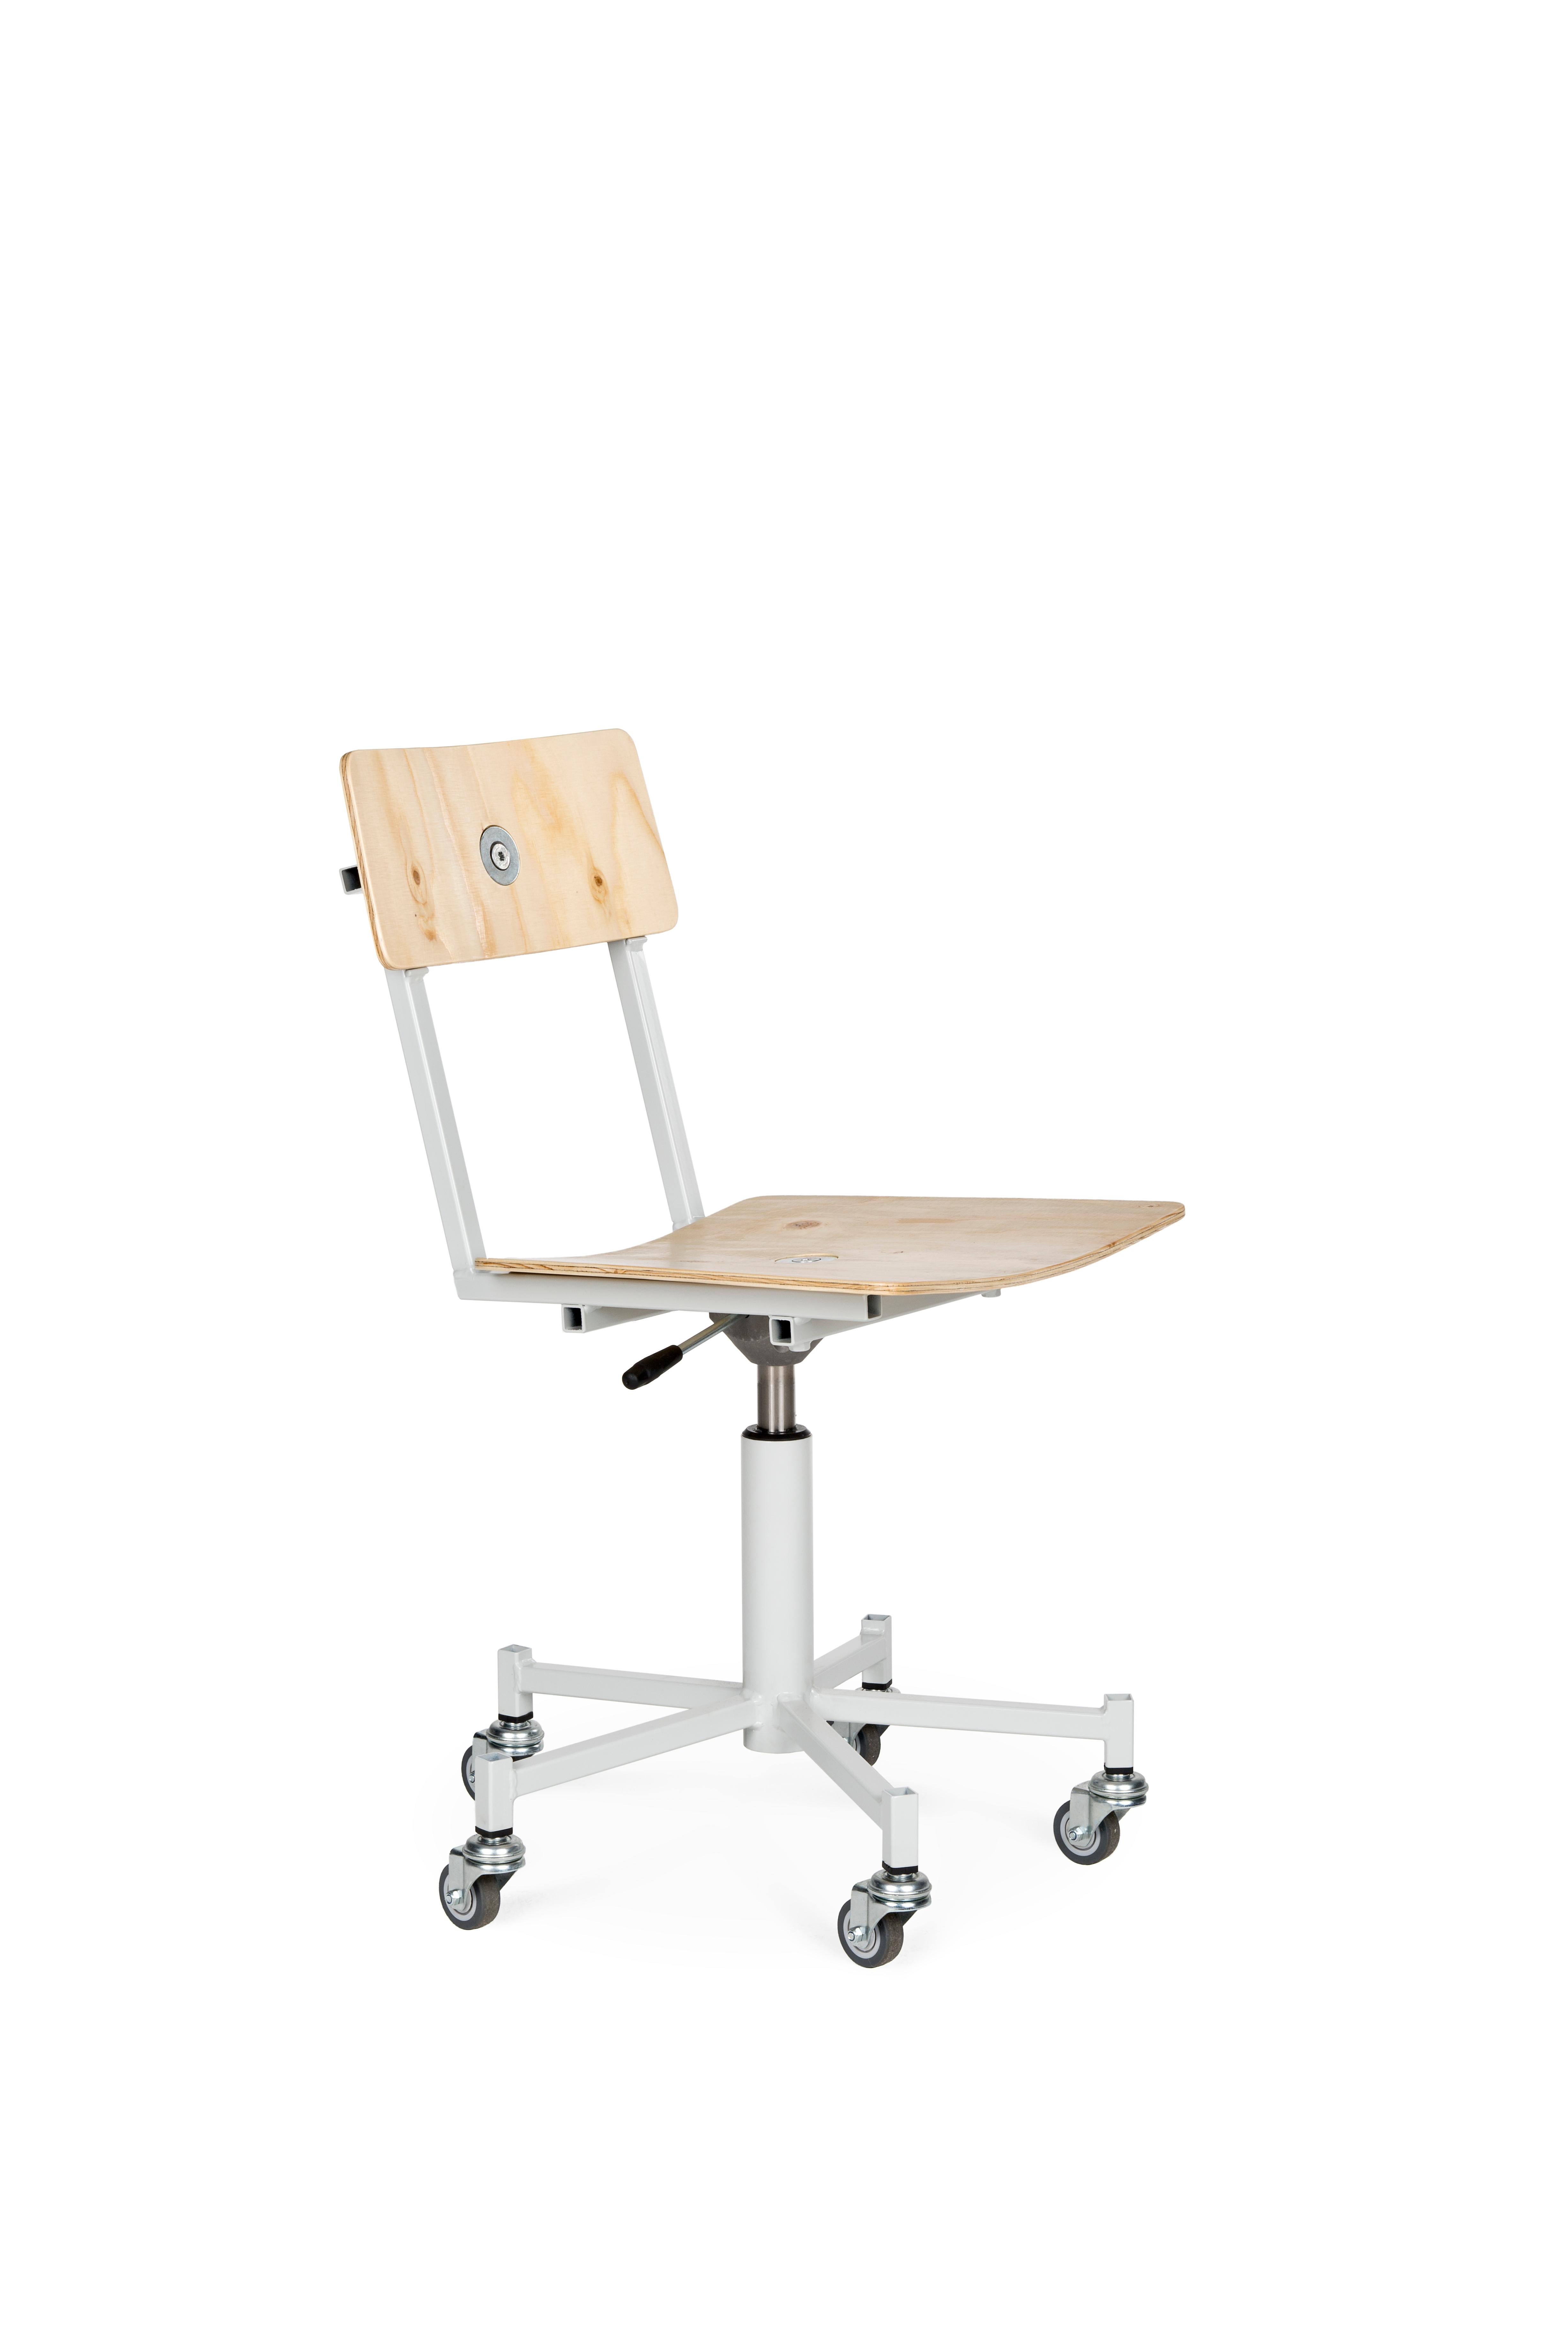 Office chair designed by Piet Hein Eek. Also can be used as meeting room or dining room chair.
   